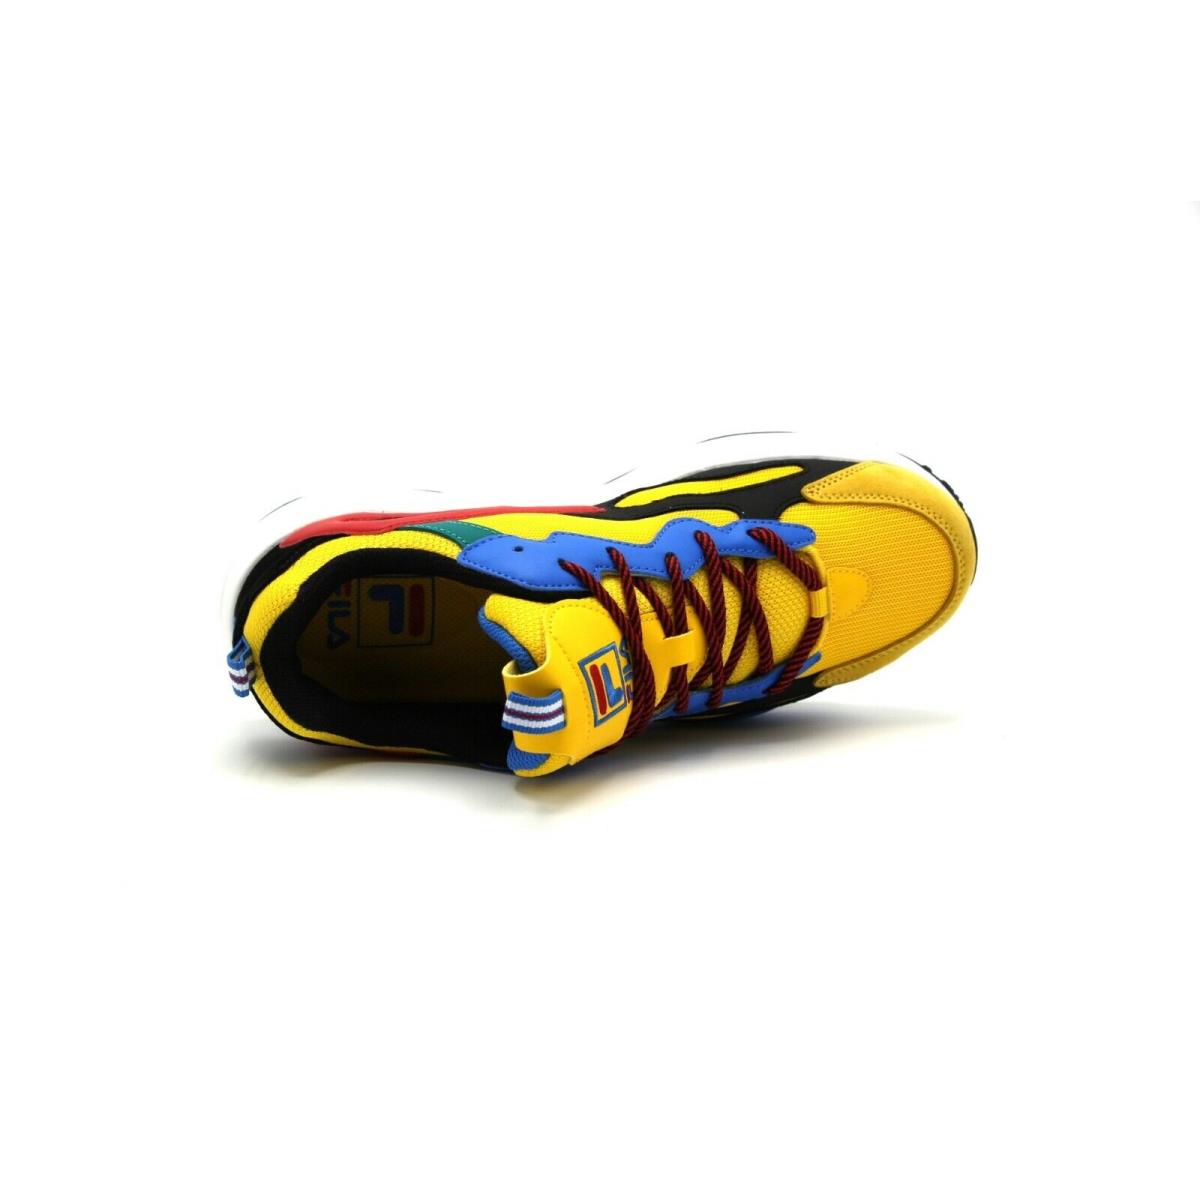 Fila shoes RAY TRACER - Yellow Red Blue Black White 4